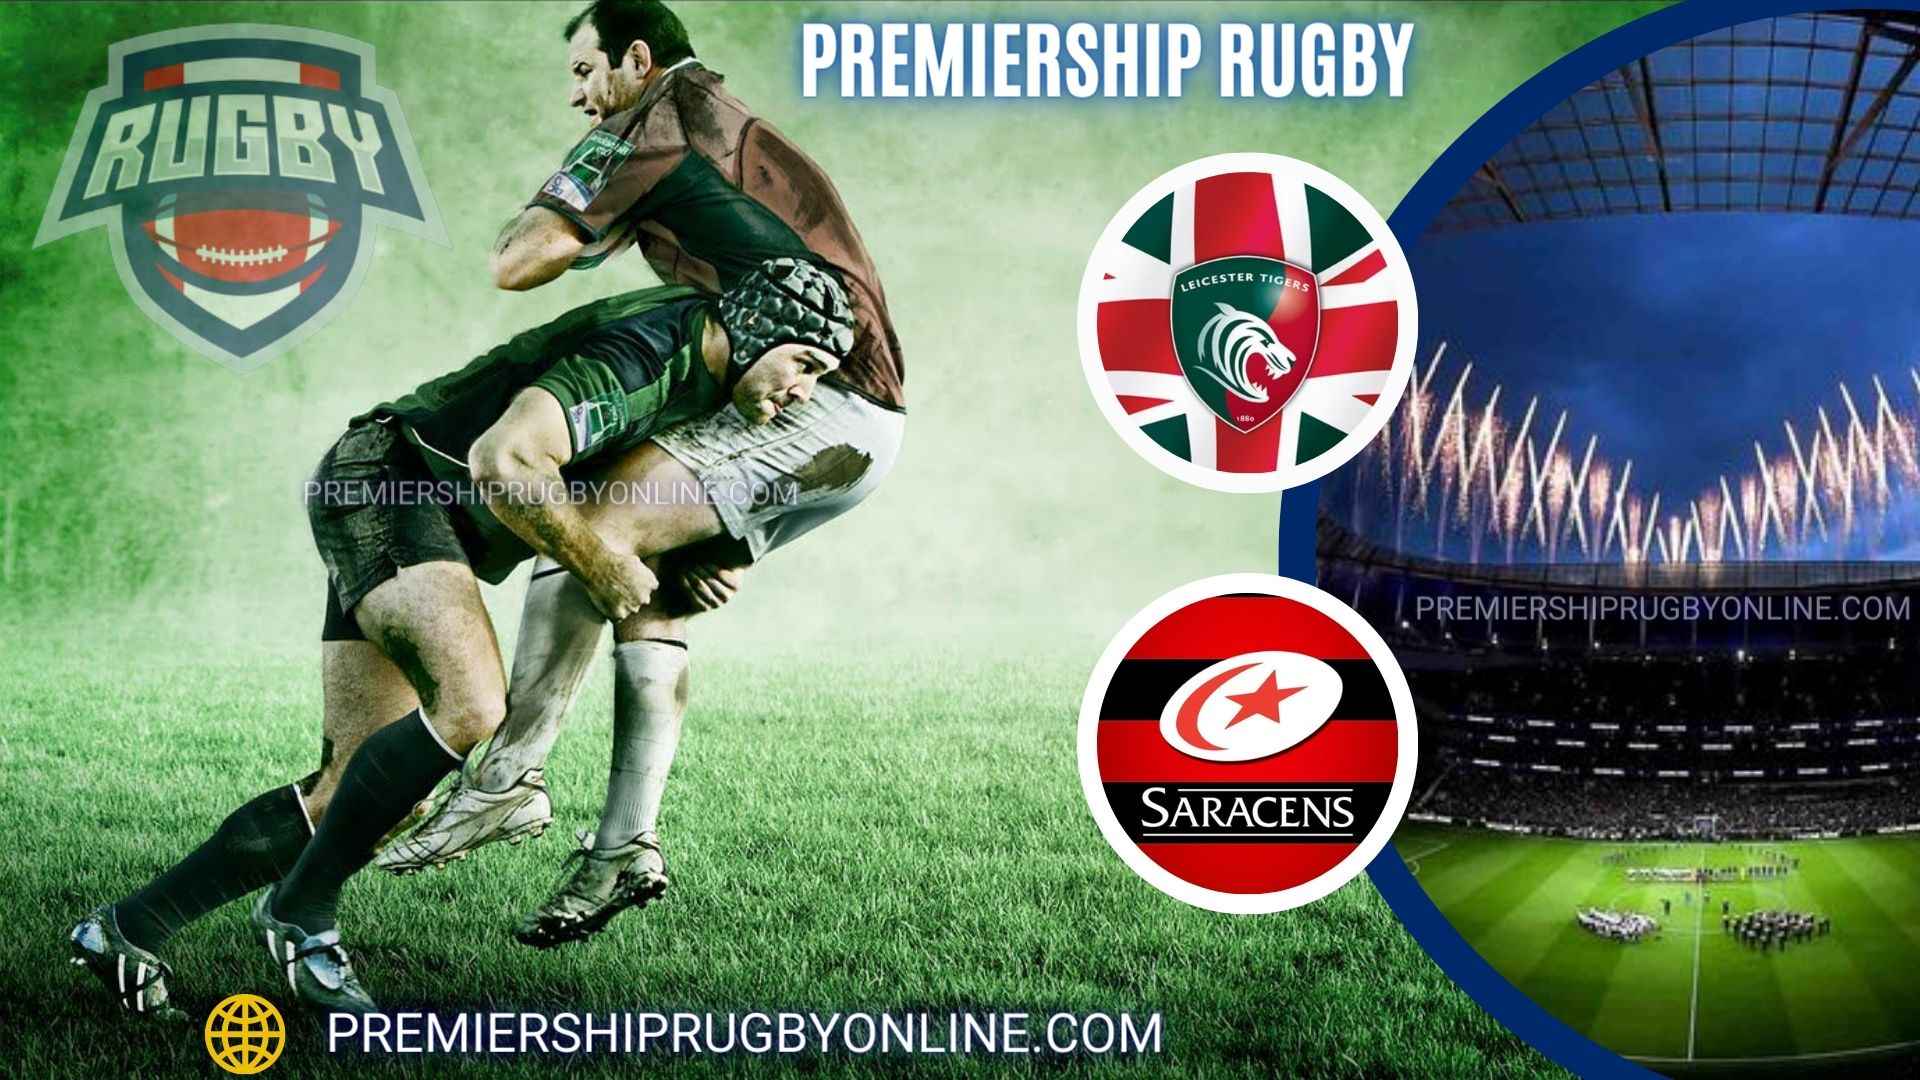 Leicester Tigers Vs Saracens Live Stream 2022-23 | Premiership Rugby RD 17